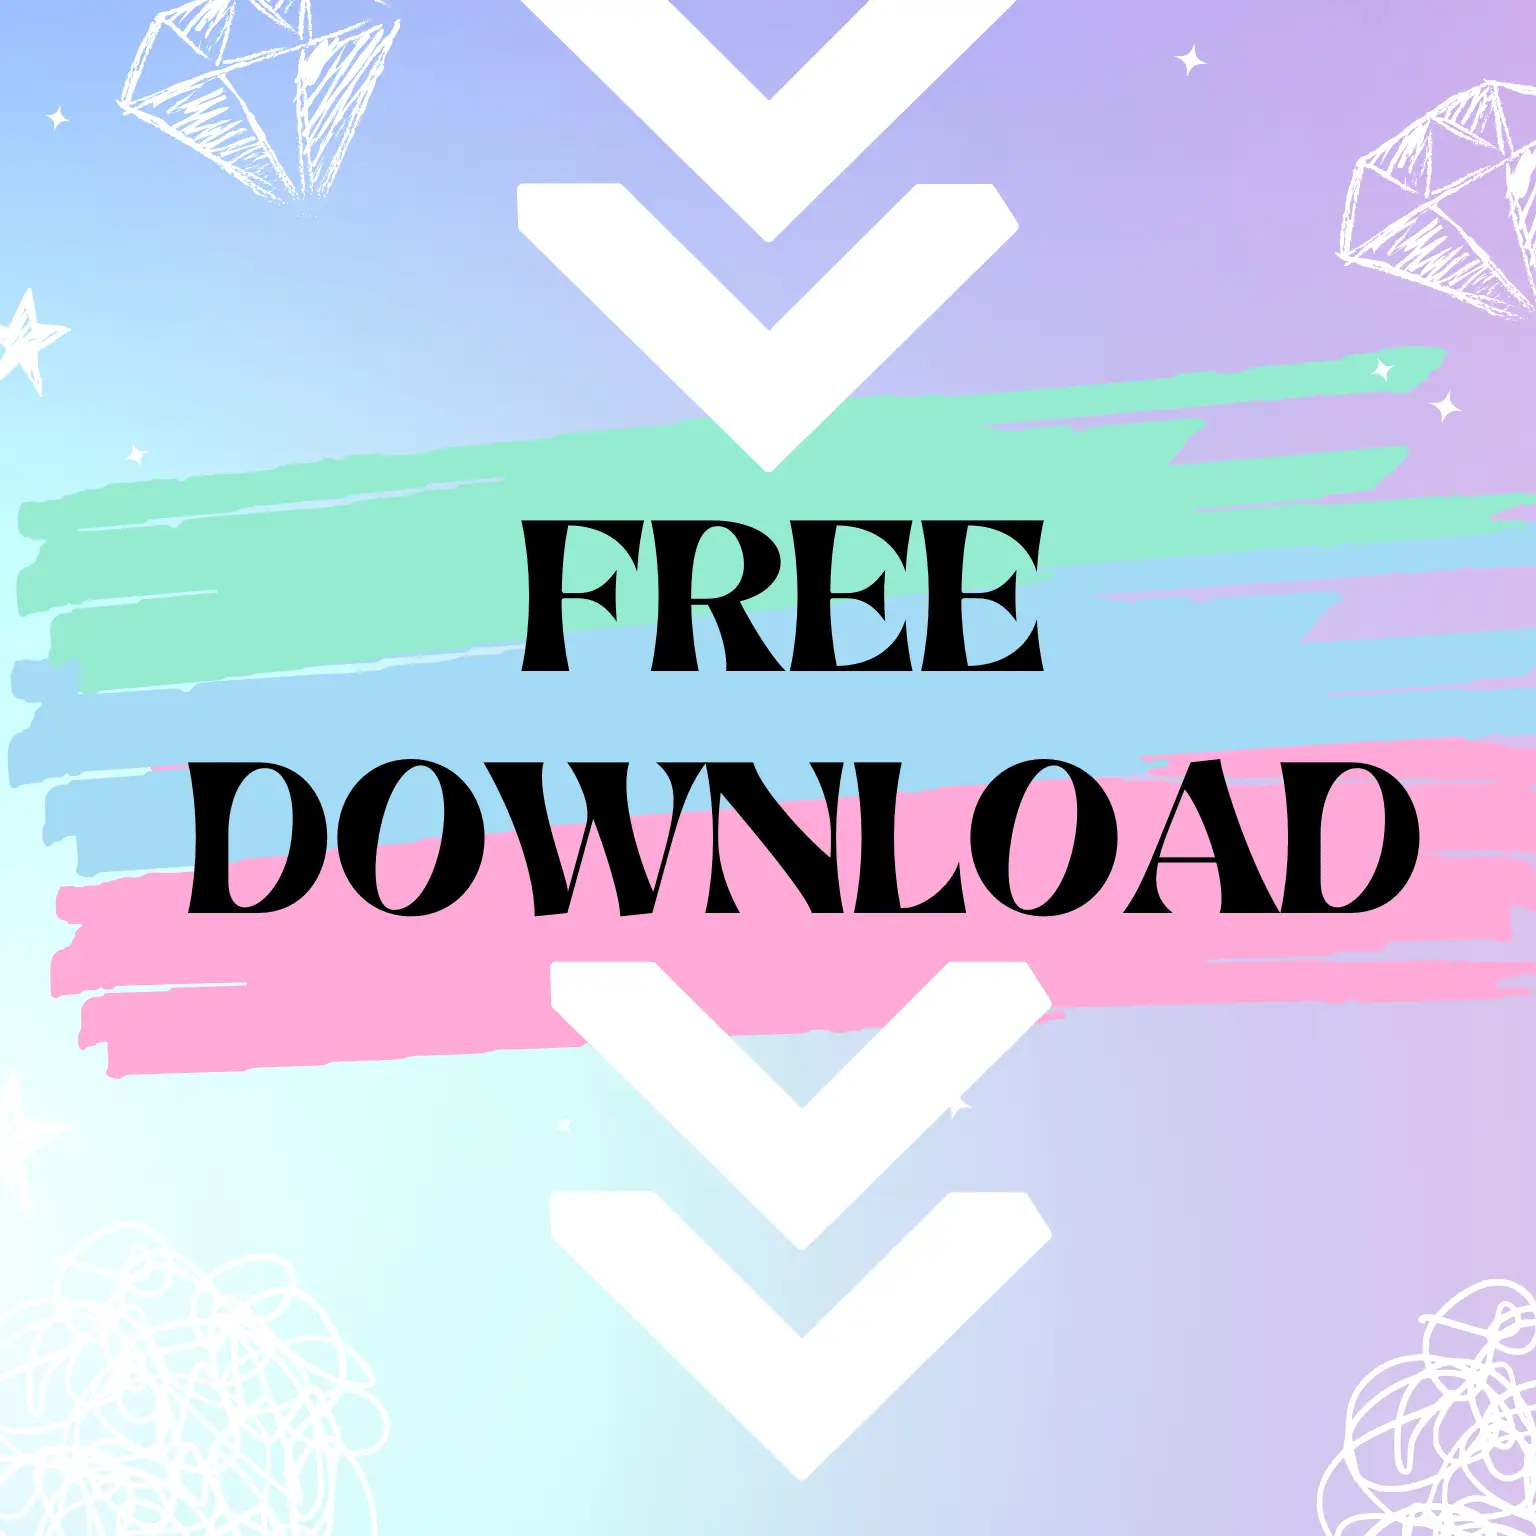 Free download sign for a marketing guide for a dog walking and pet sitting business